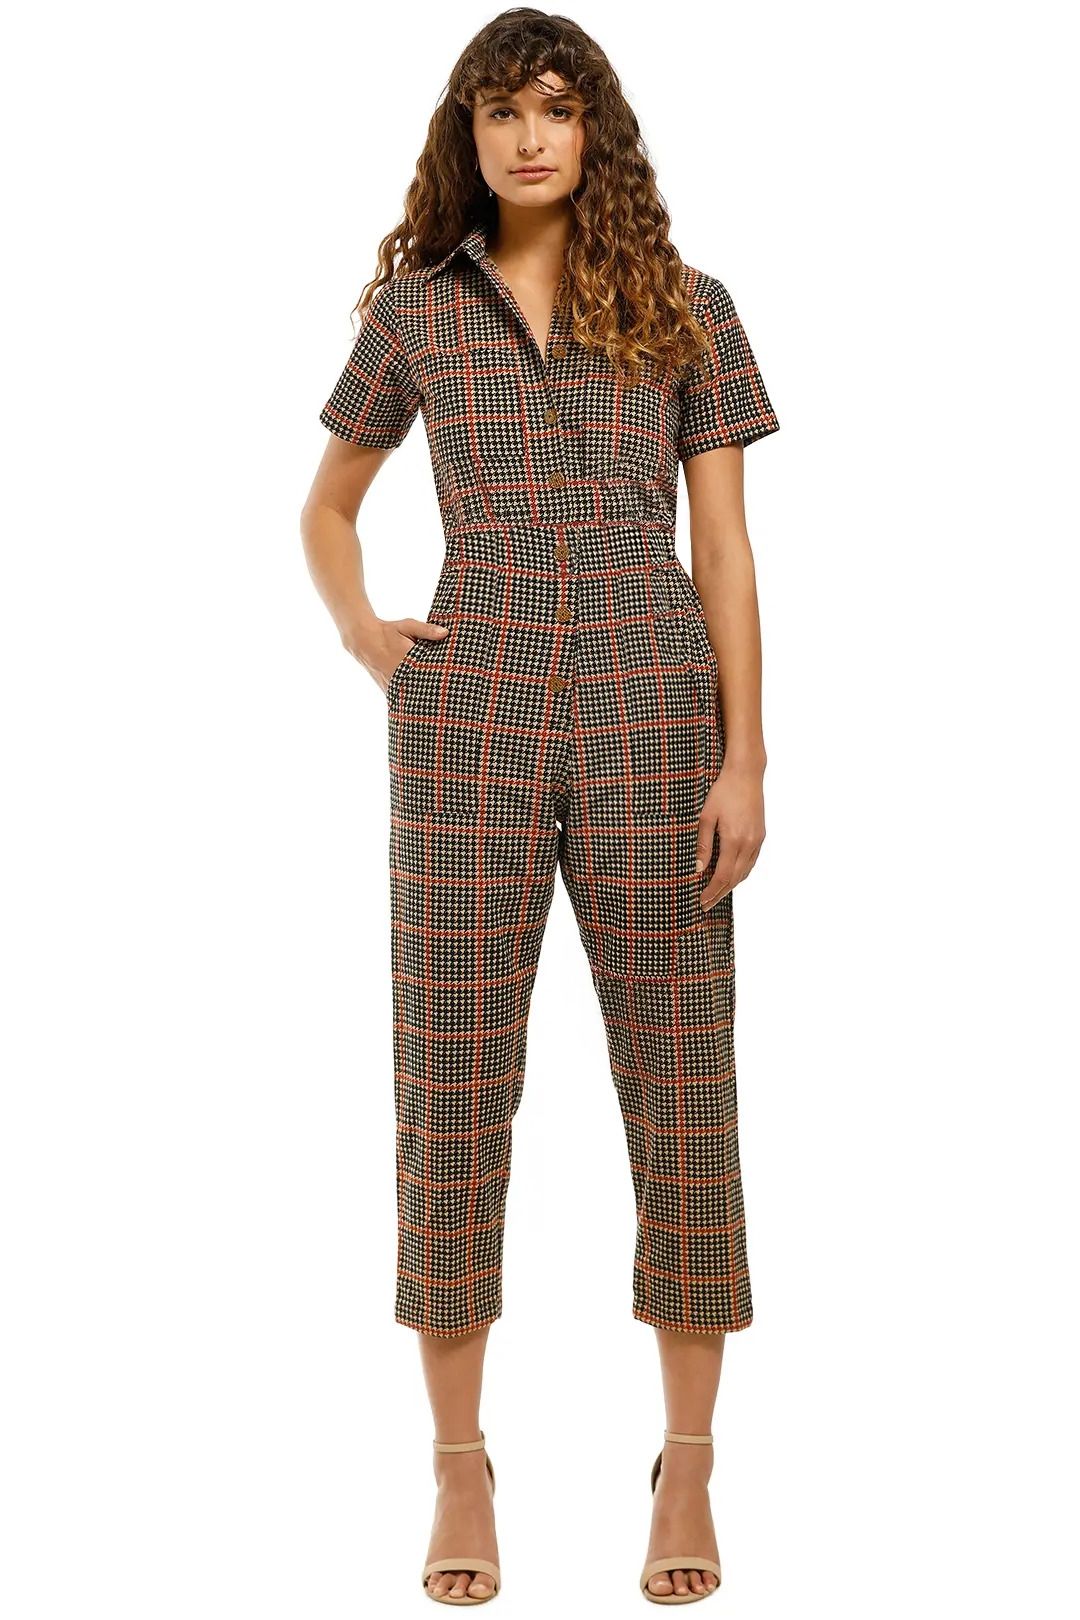 Rue-Stiic-Alamere-Worksuit-Houndstooth-Front-No-Belt